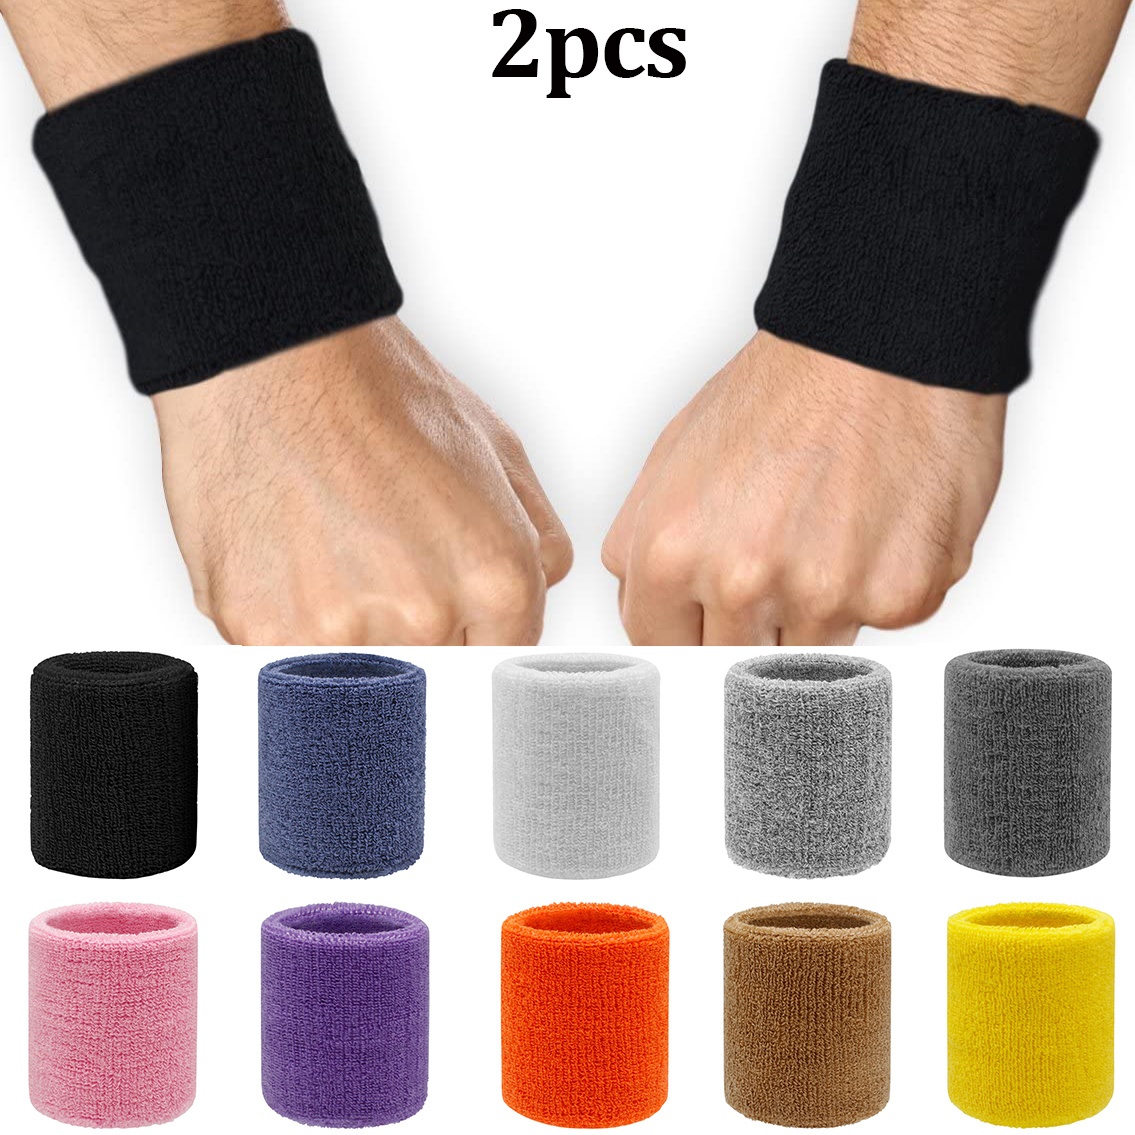 Couver 9 inch Extra Long Thick Athletic Cotton Absorbent Sports Wrist Sweatbands for Basketball, Running, Tennis, Gym, Cycling and Working Out (1